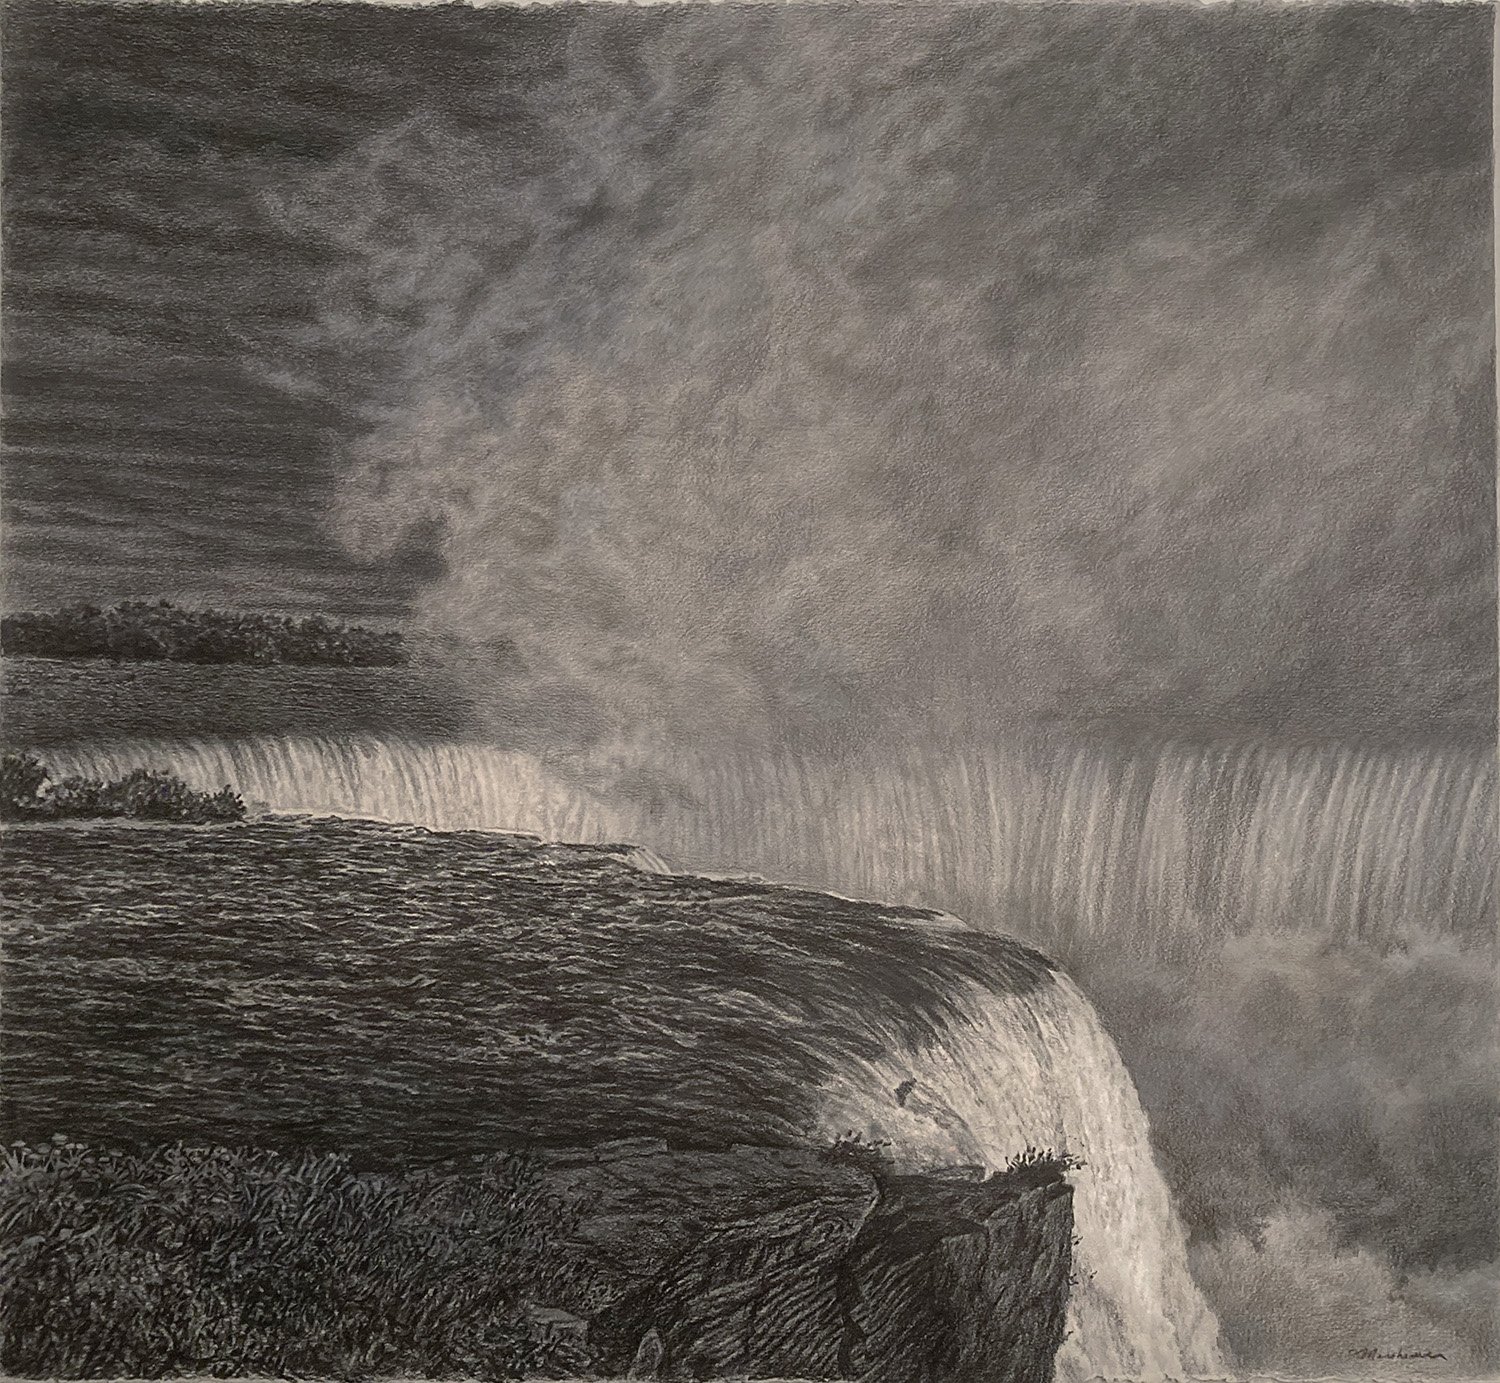 Edge of the World, 22 1/4 x 24", pencil on paper